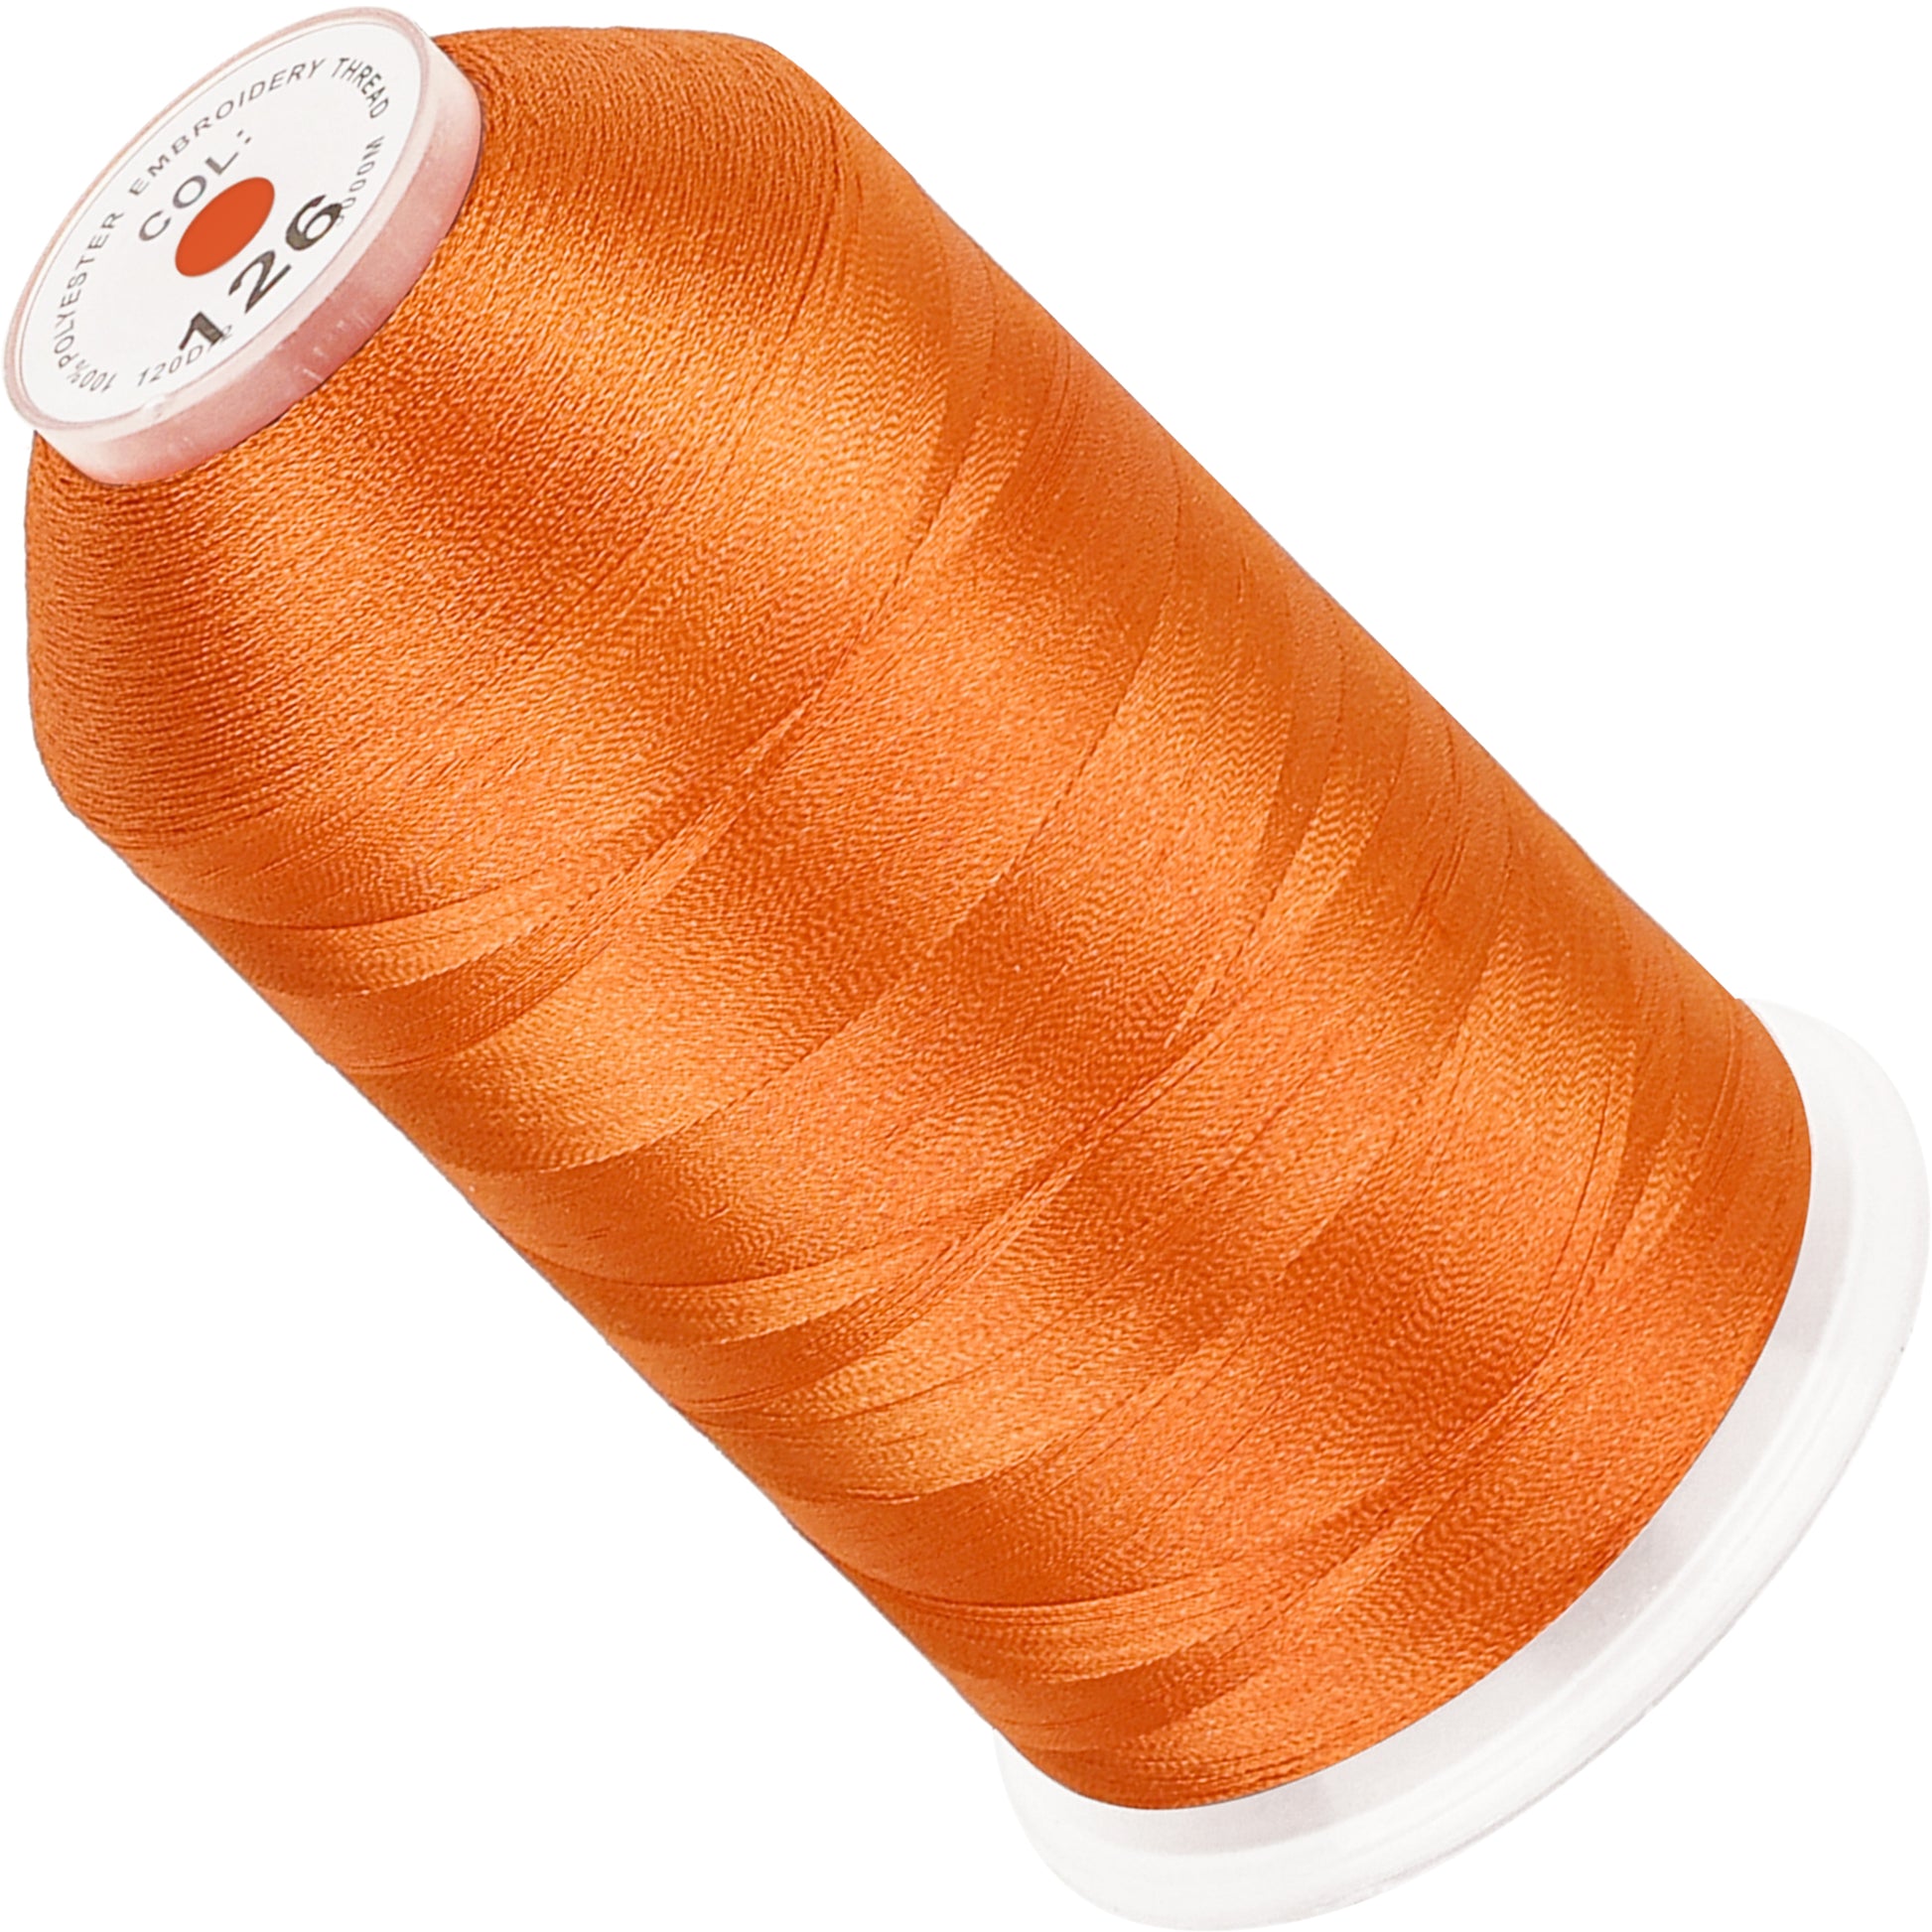 White Machine Embroidery Thread - Large - 5000 Meters —